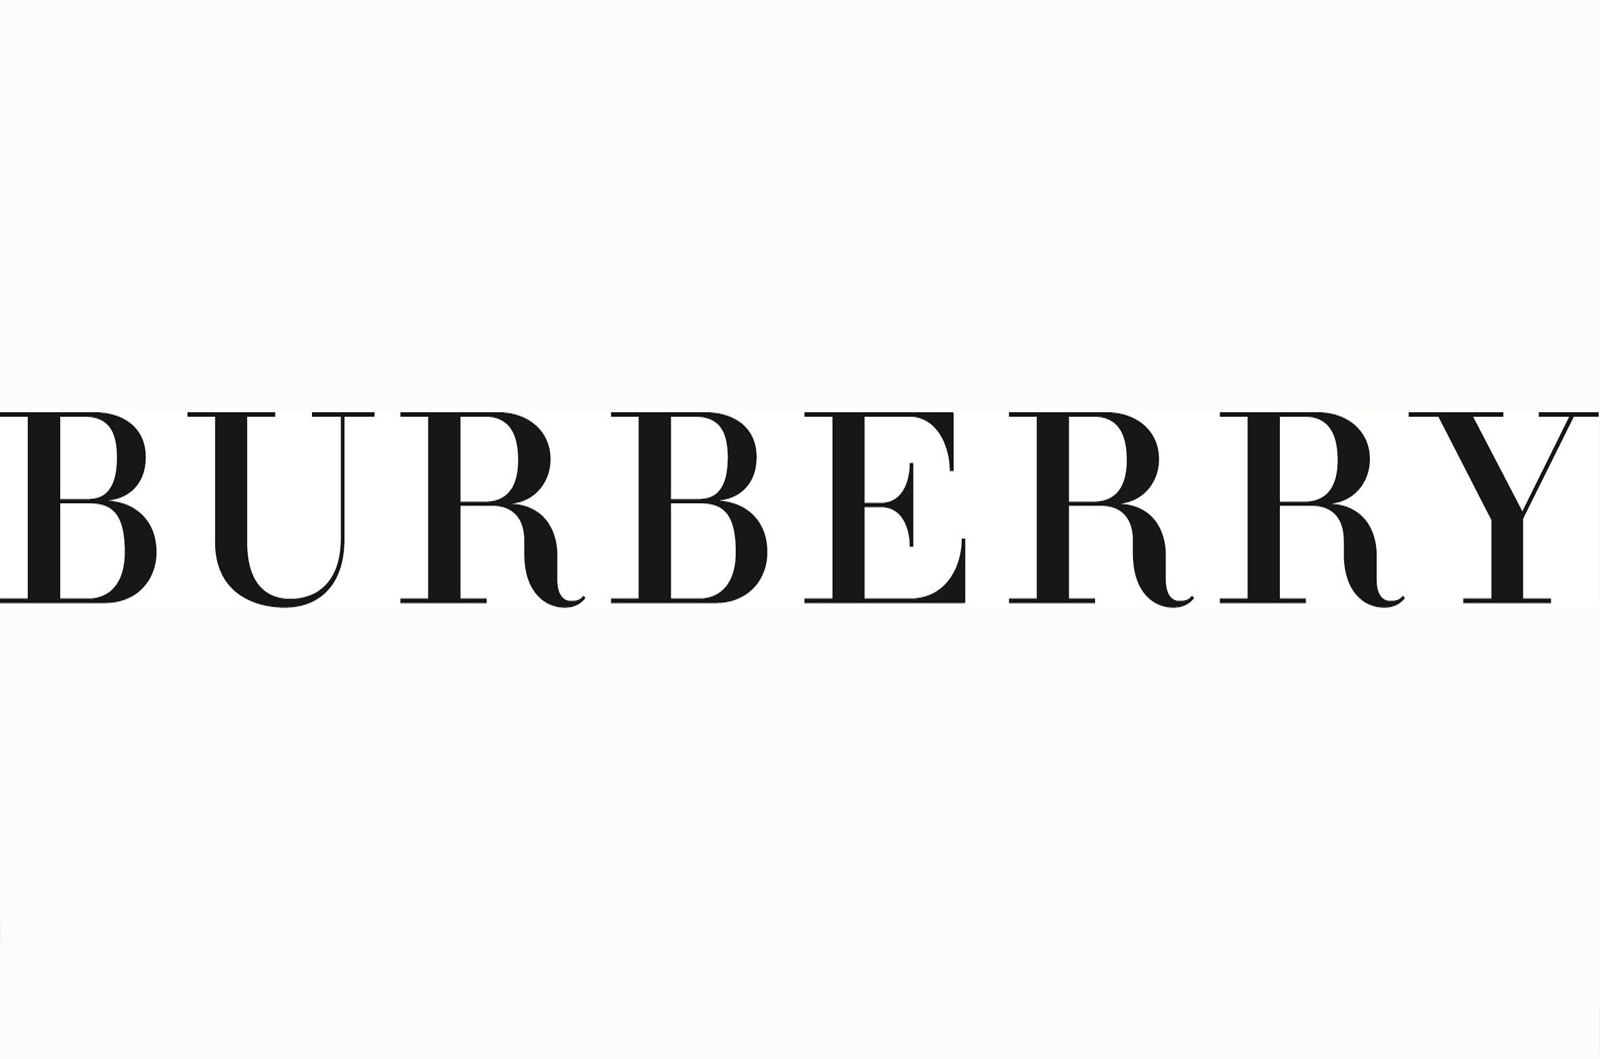 Burberry Clothing Logo Vector PNG - 33672